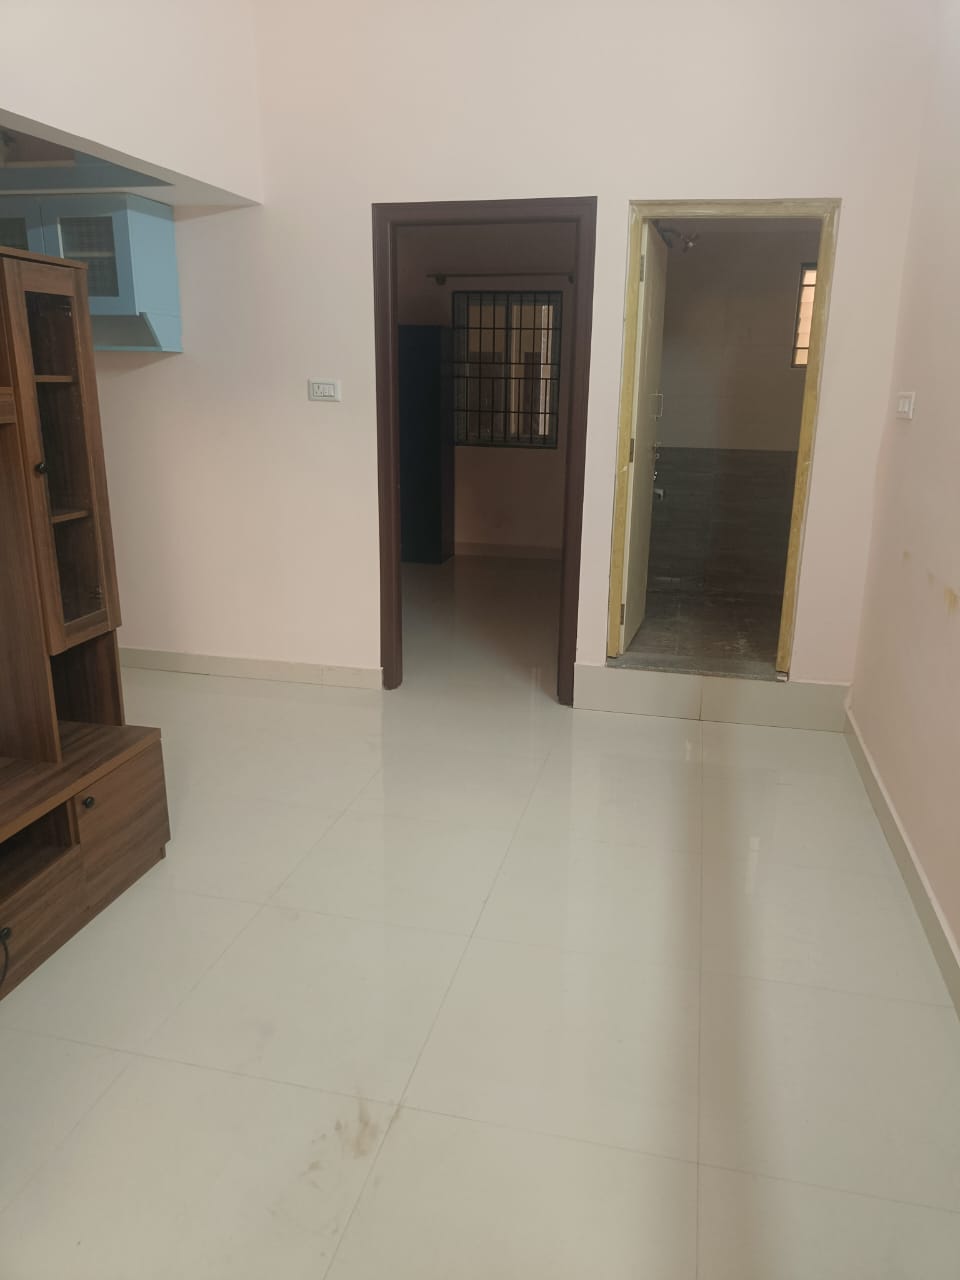 2 BHK Residential Apartment for Lease Only at JAML2 - 4155 in Hoodi